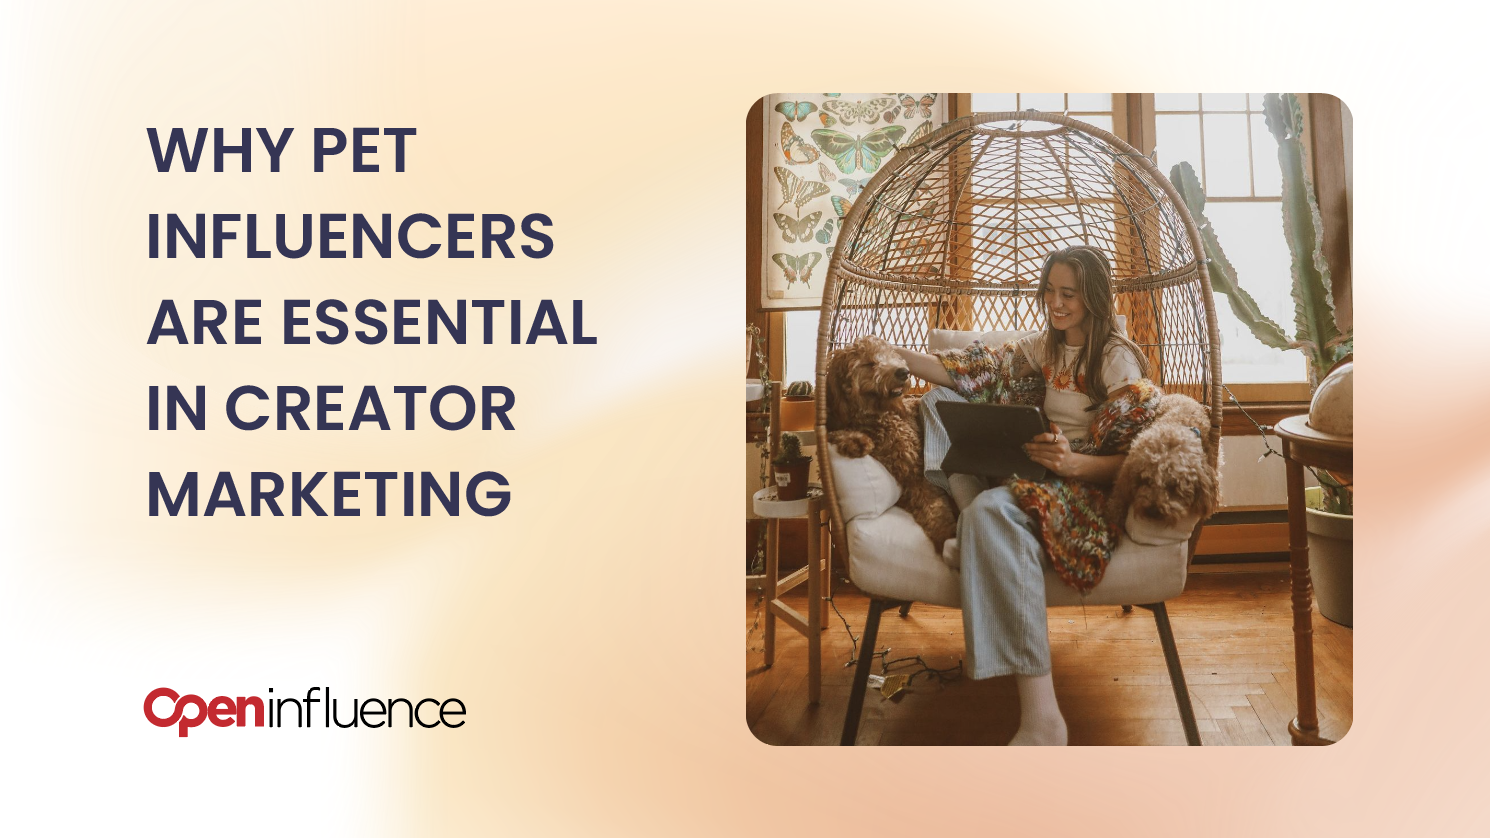 8 Reasons Why Pet Influencers Are Essential in Creator Marketing